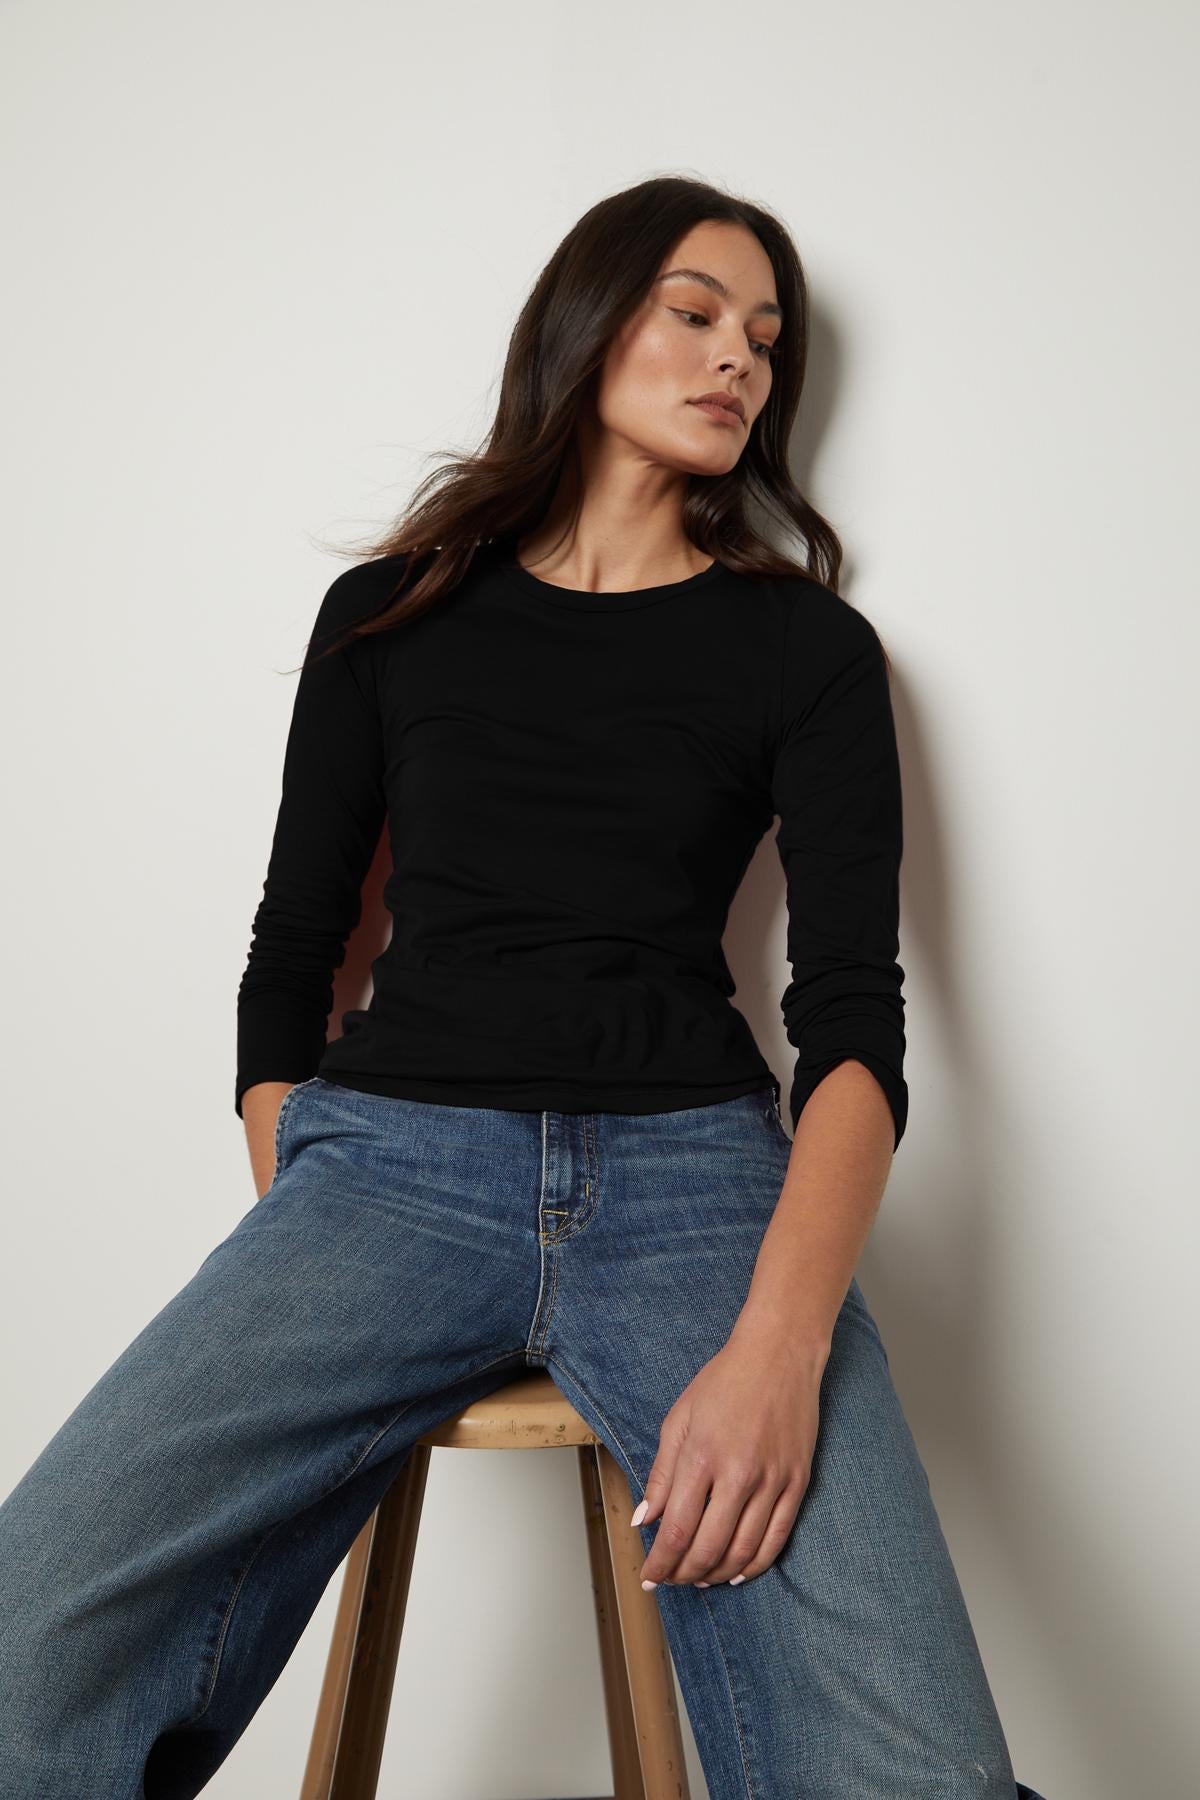   A woman sitting on a stool in black jeans and a ZOFINA GAUZY WHISPER FITTED CREW NECK TEE by Velvet by Graham & Spencer. 